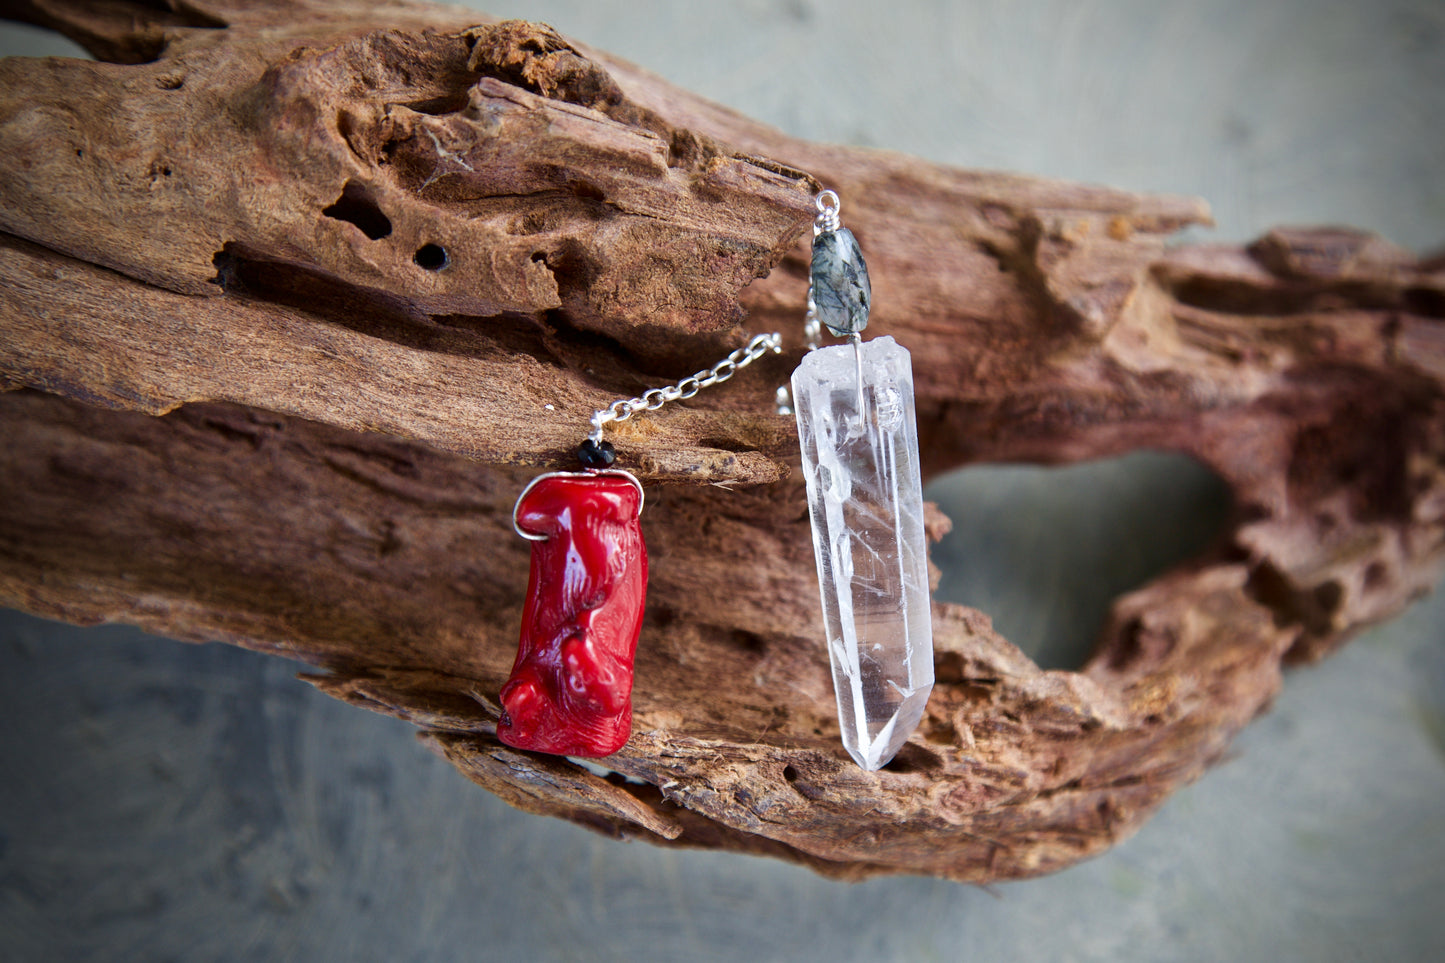 Red Coral, Onyx, Tourmalinated Quartz, Single Termination Clear Quartz Shovel Crystal, and Sterling Silver Double-sided Pendulum